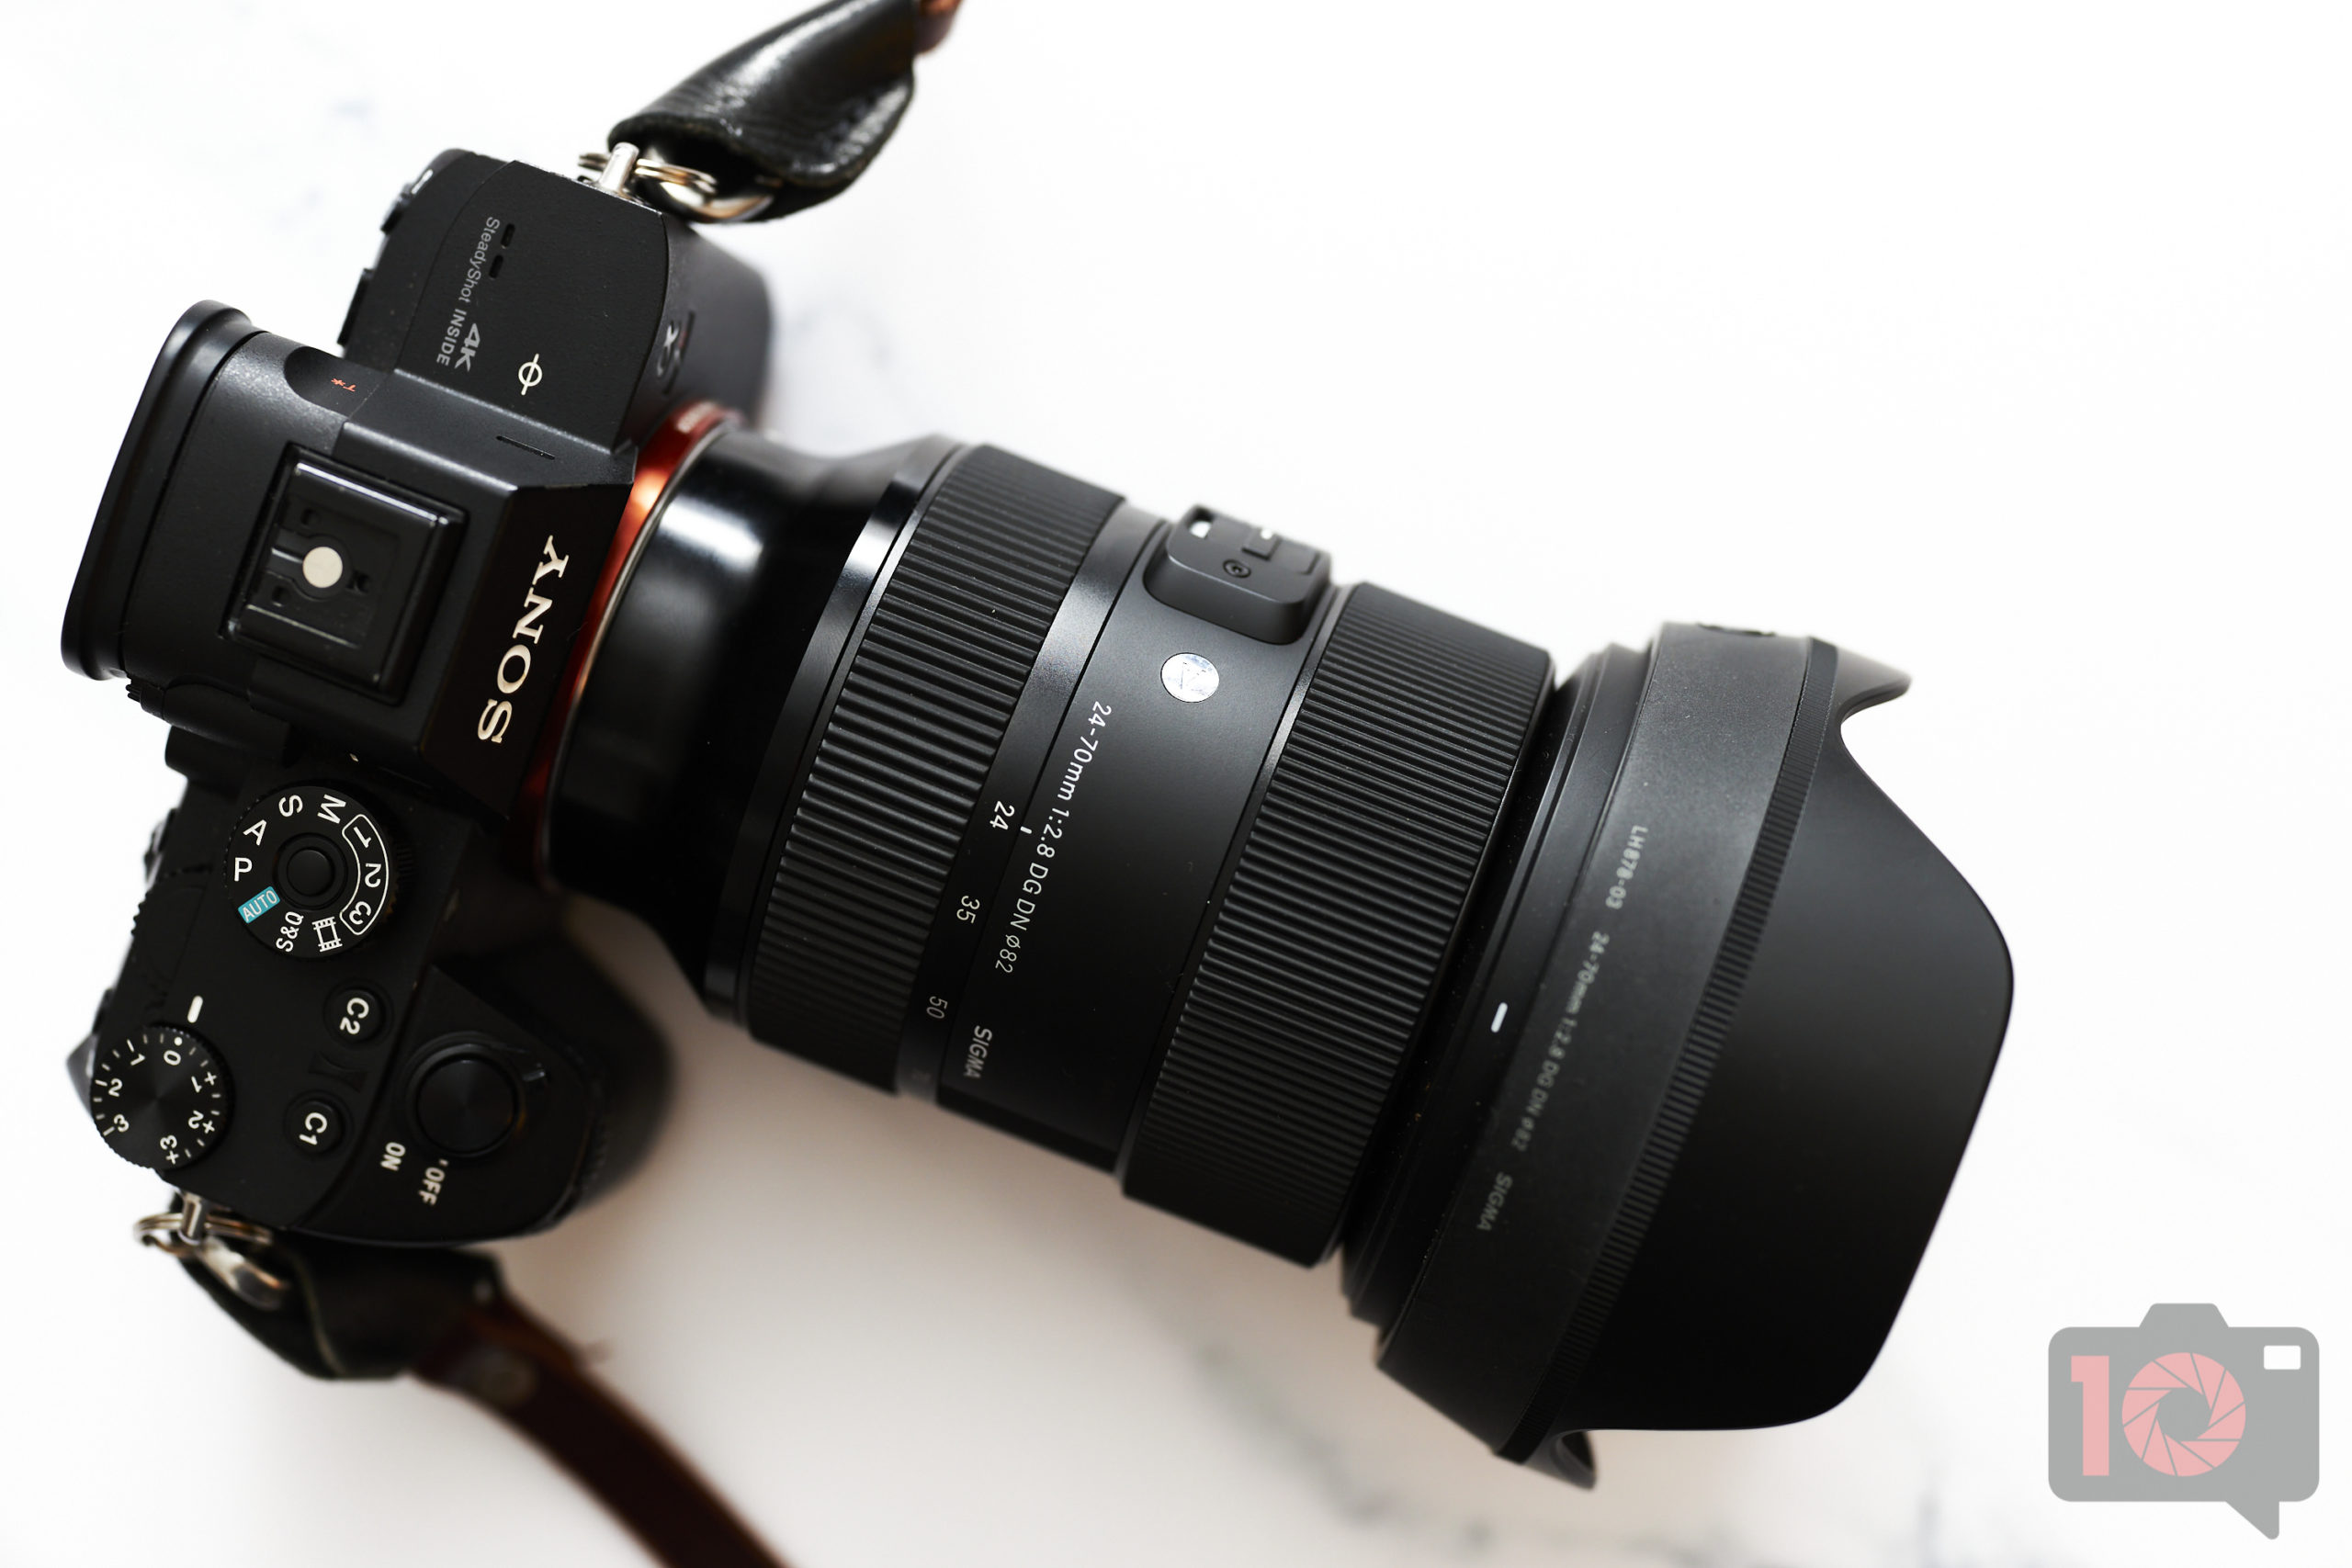 Chris Gampat The Phoblographer Sigma 24-70mm f2.8 Art DG DN review product images 2.81-50s400